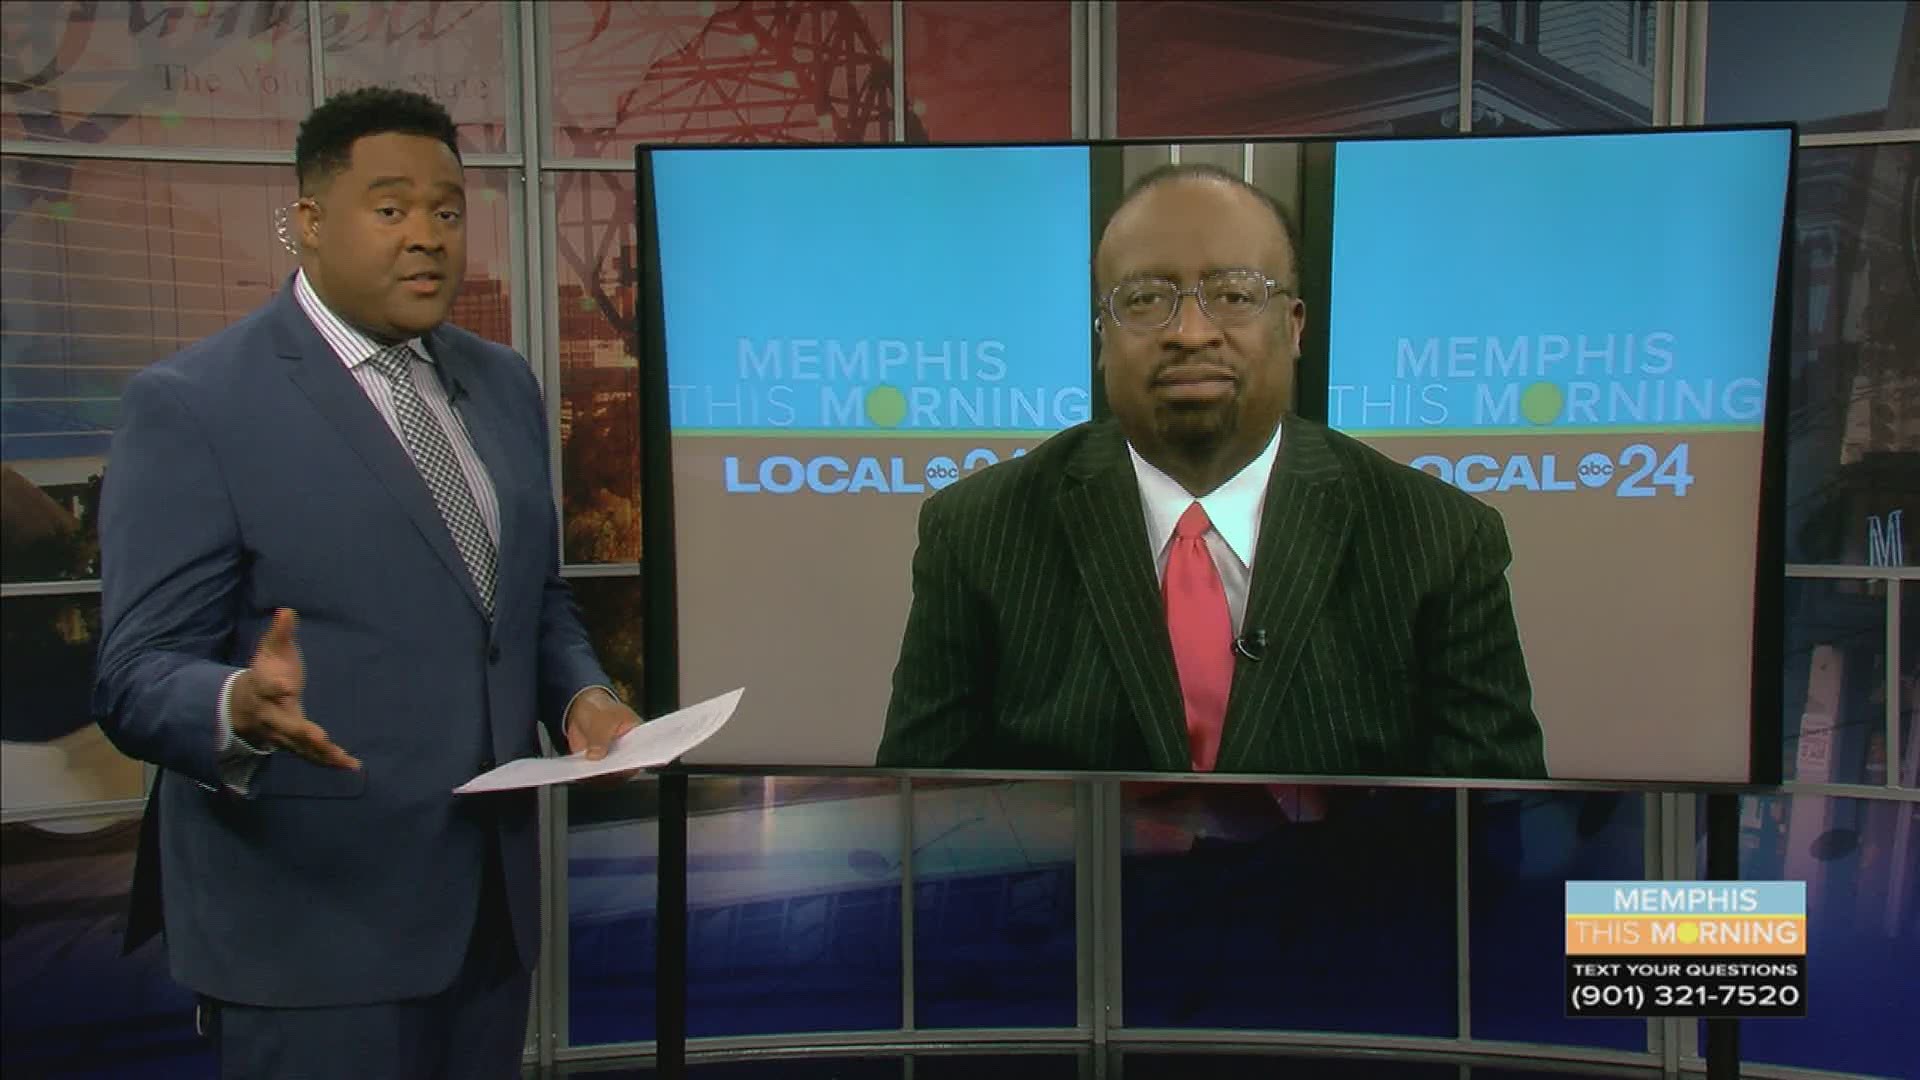 Join anchor John Paul and Political Analyst Otis Sanford as they discuss difficult topics on racism, politics, and much more.